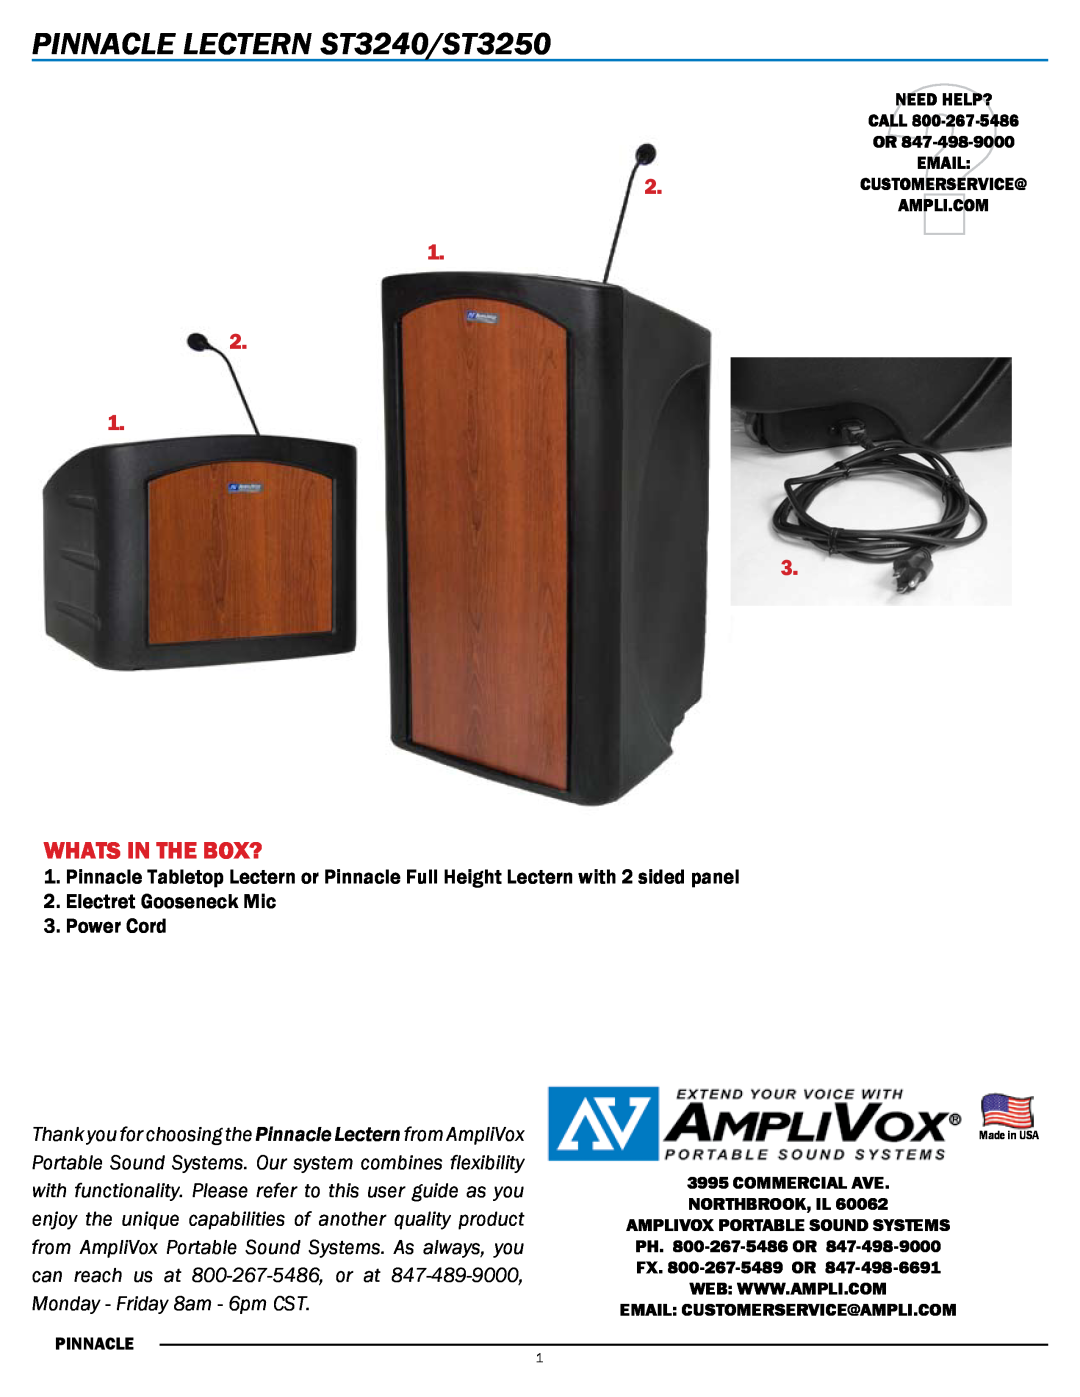 AmpliVox ST3240, ST3250 manual PINNACLE LECTERN St3240/St3250, Whats in the Box?, Electret Gooseneck Mic 3.Power Cord 